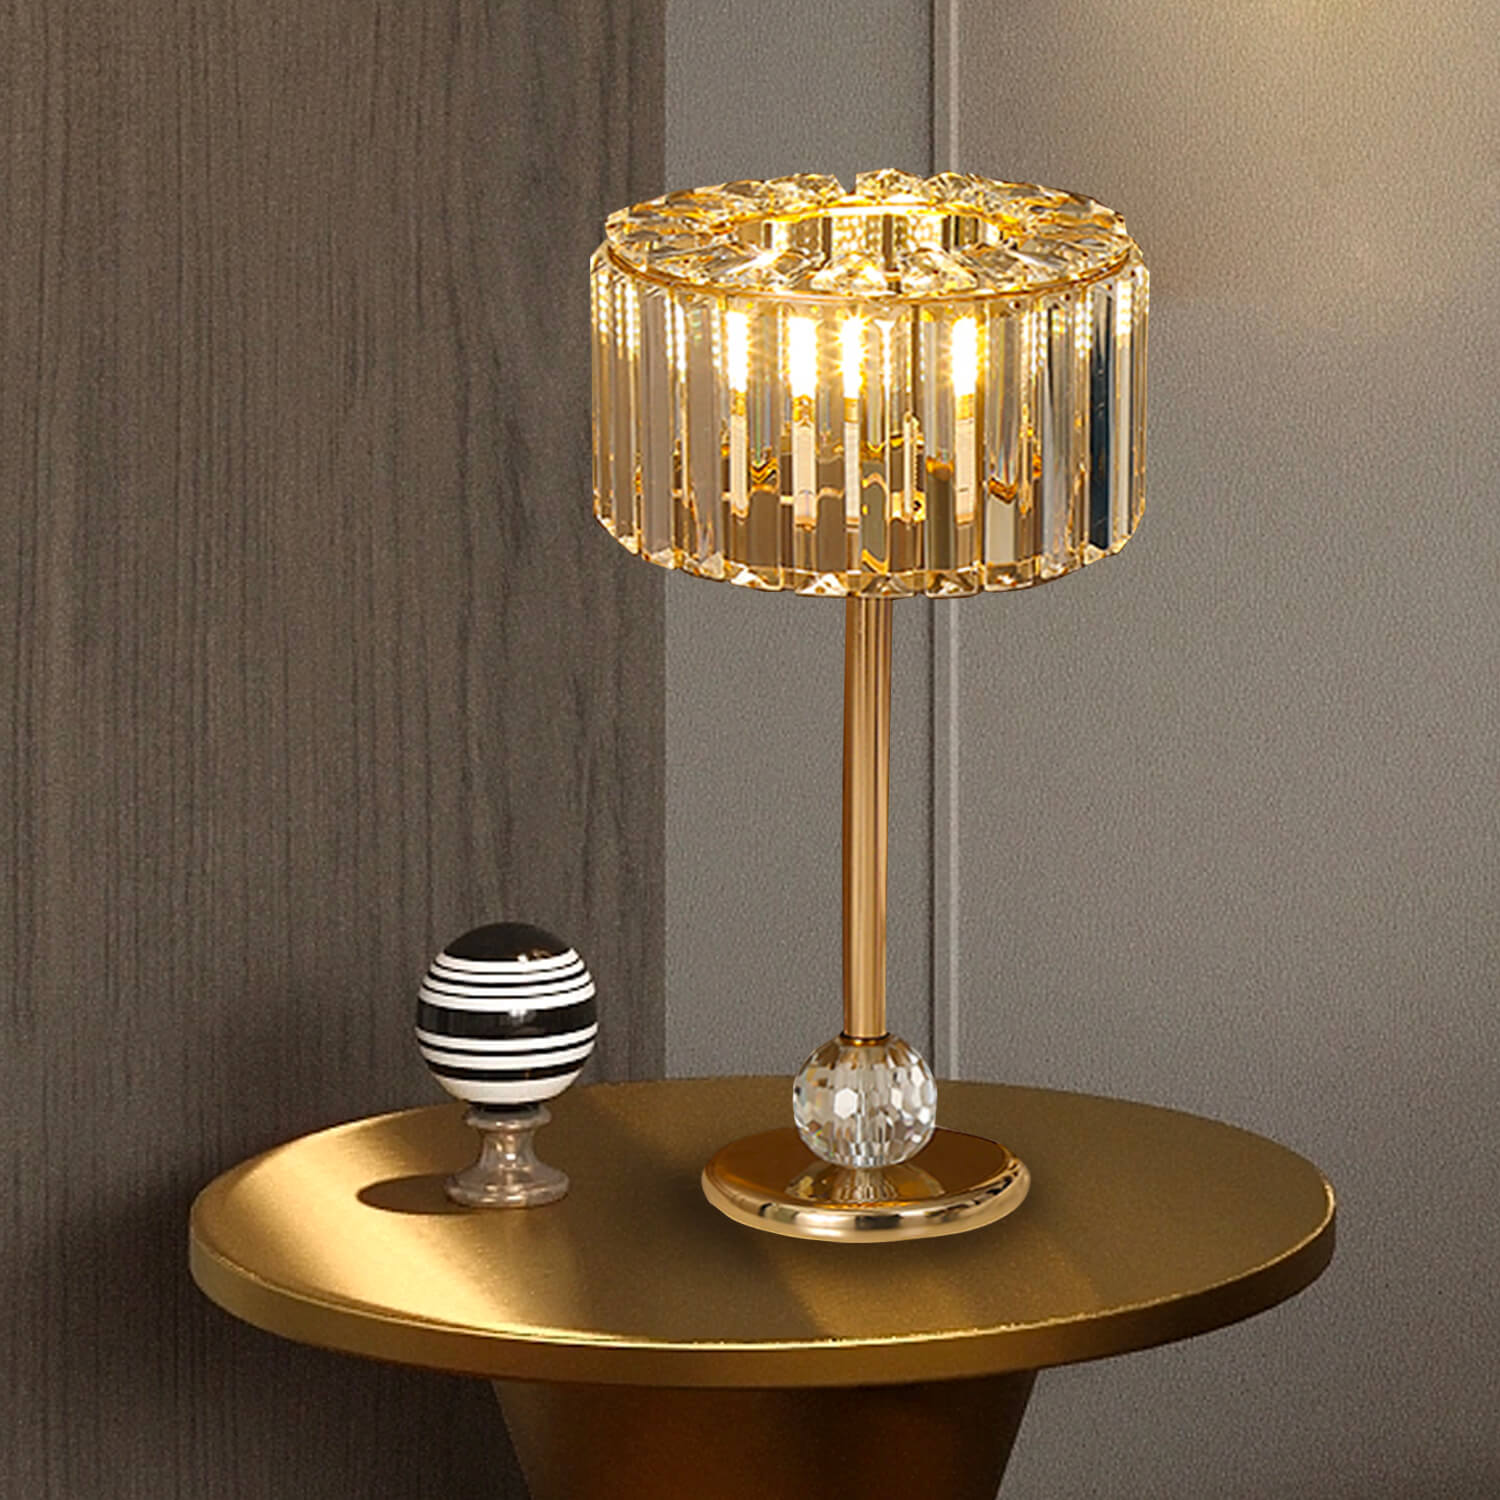 Contemporary Gold Crystal Table Lamp - Perfect for Bedside Elegance -bedroom|Sofary 